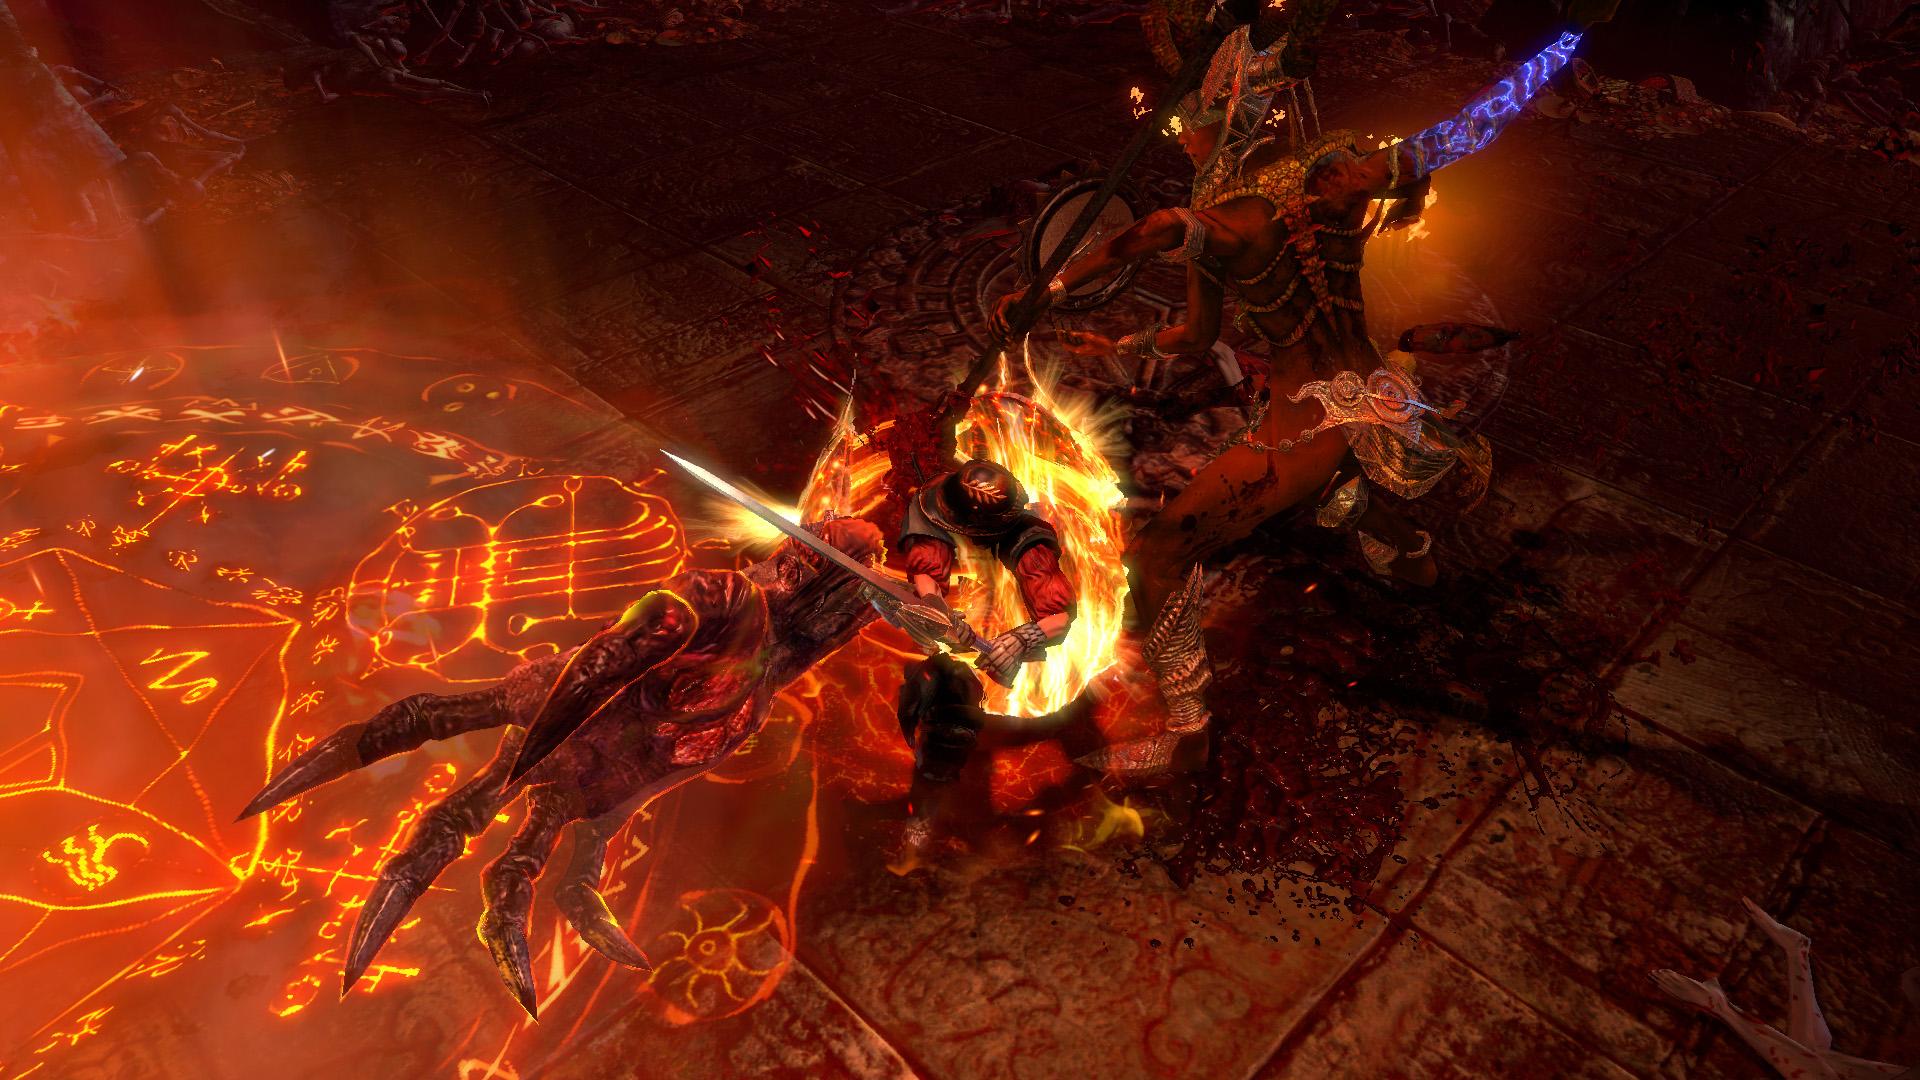 Screenshot №38 from game Path of Exile